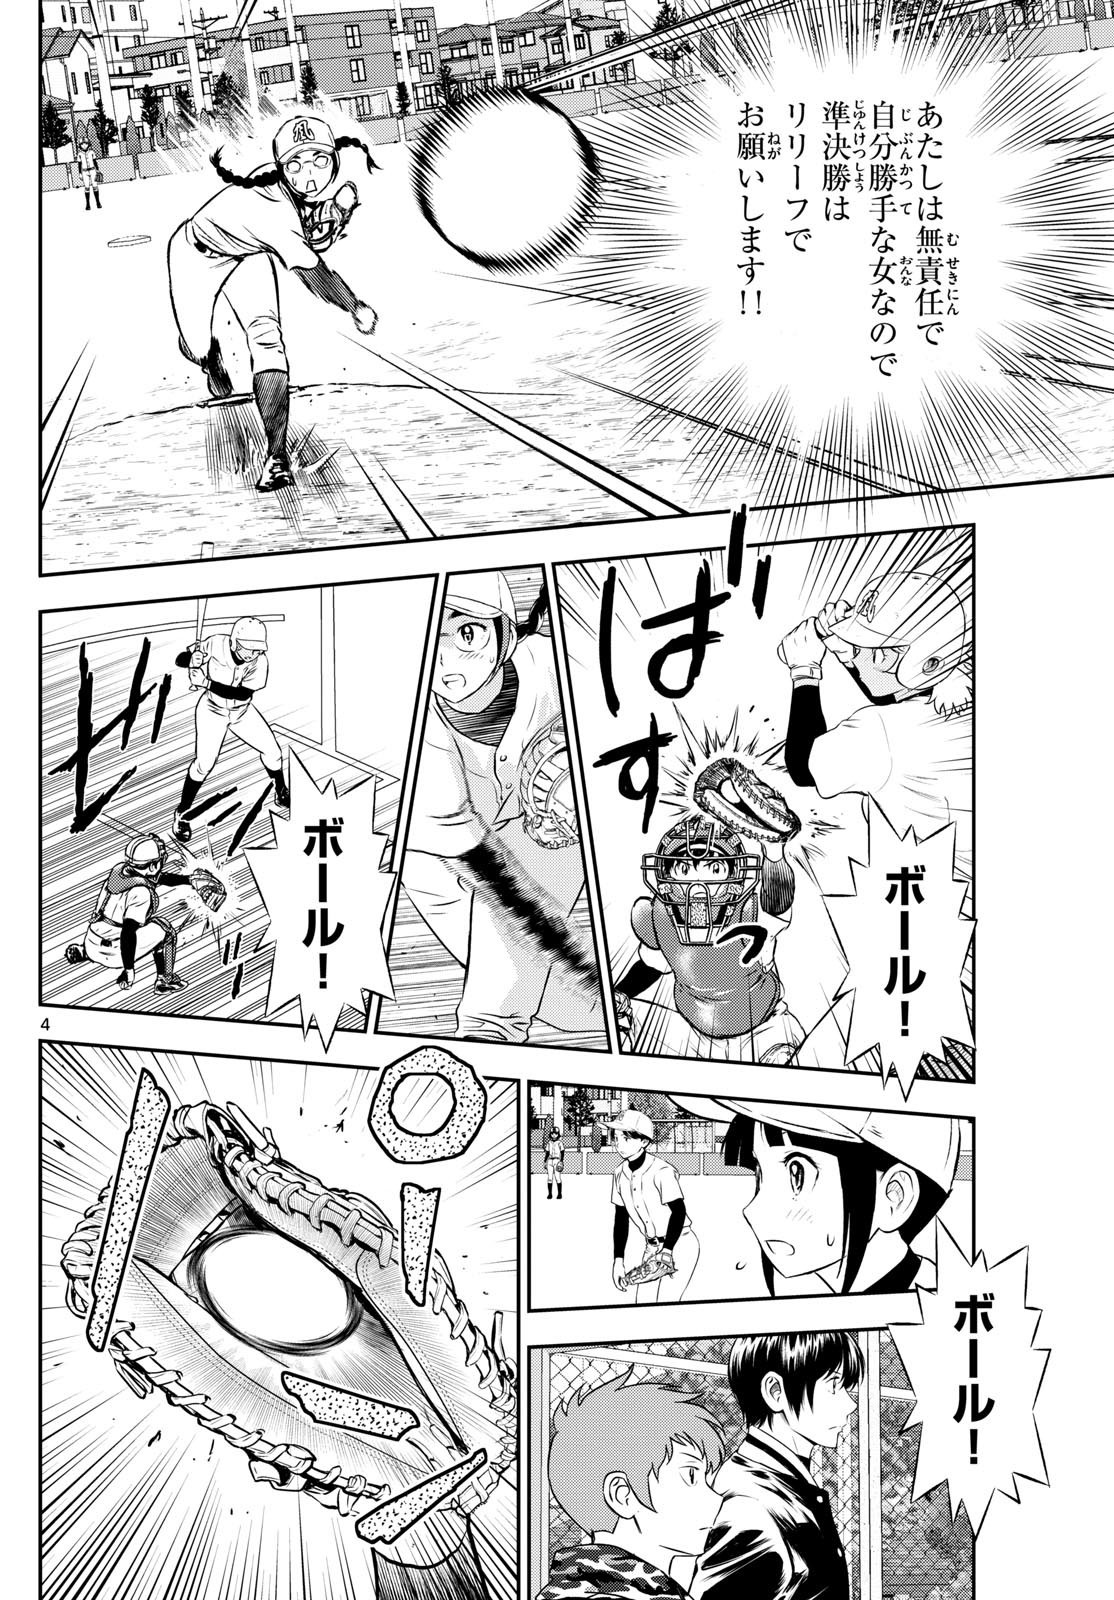 Major 2nd - メジャーセカンド - Chapter 282 - Page 4